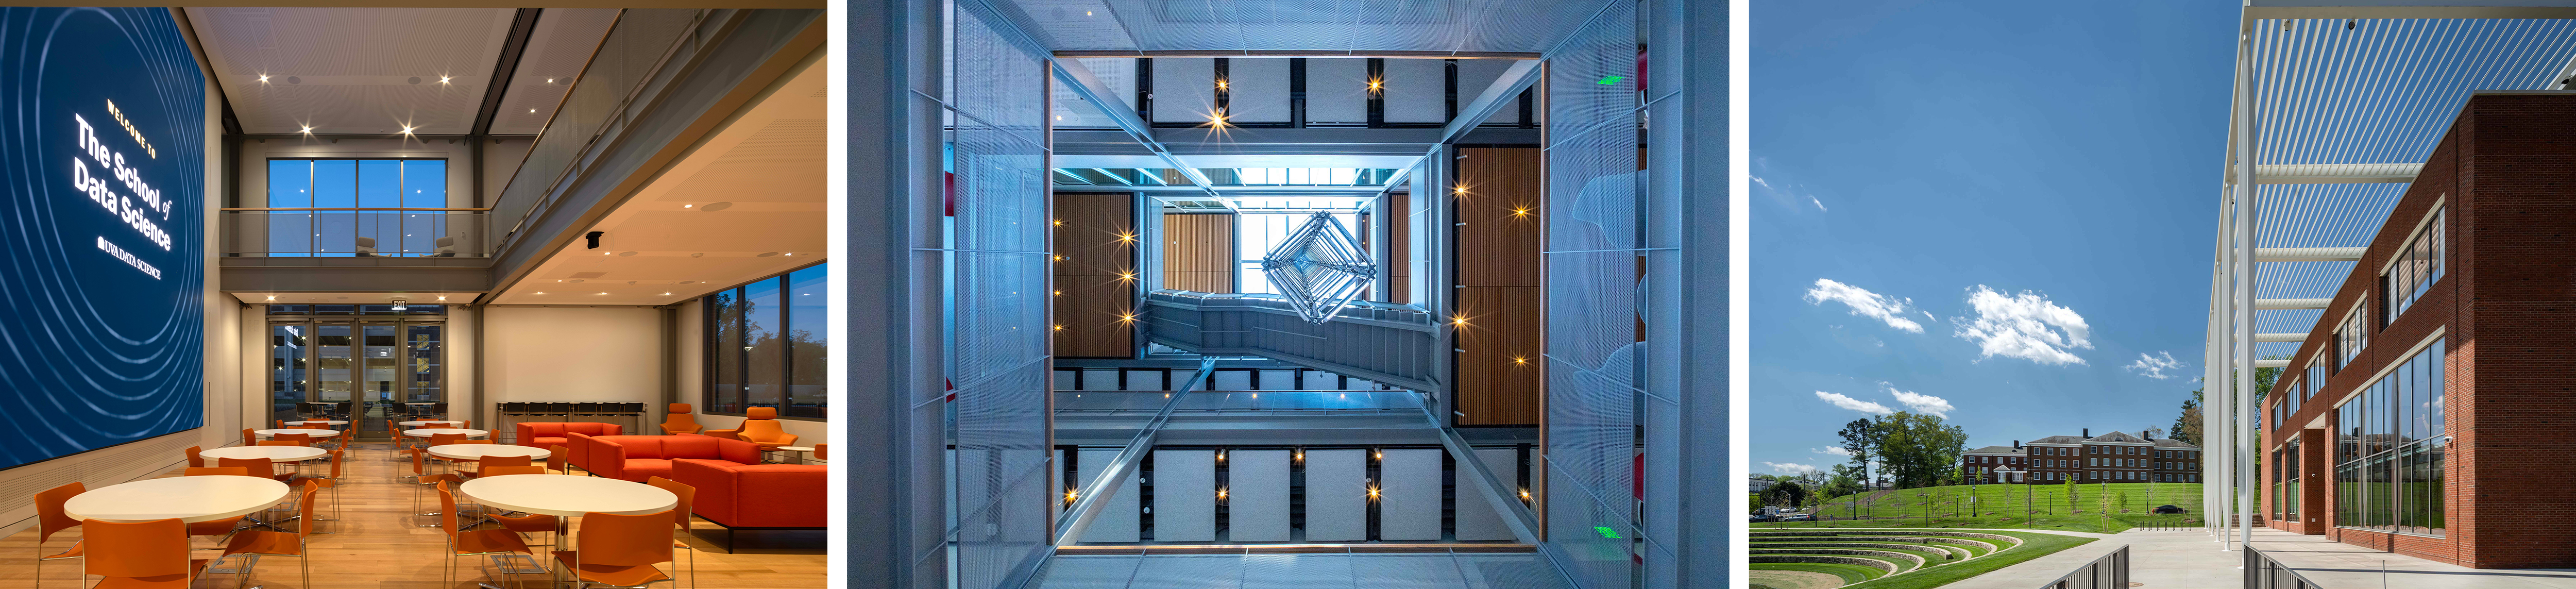 Architectural view of spaces at the SDS building